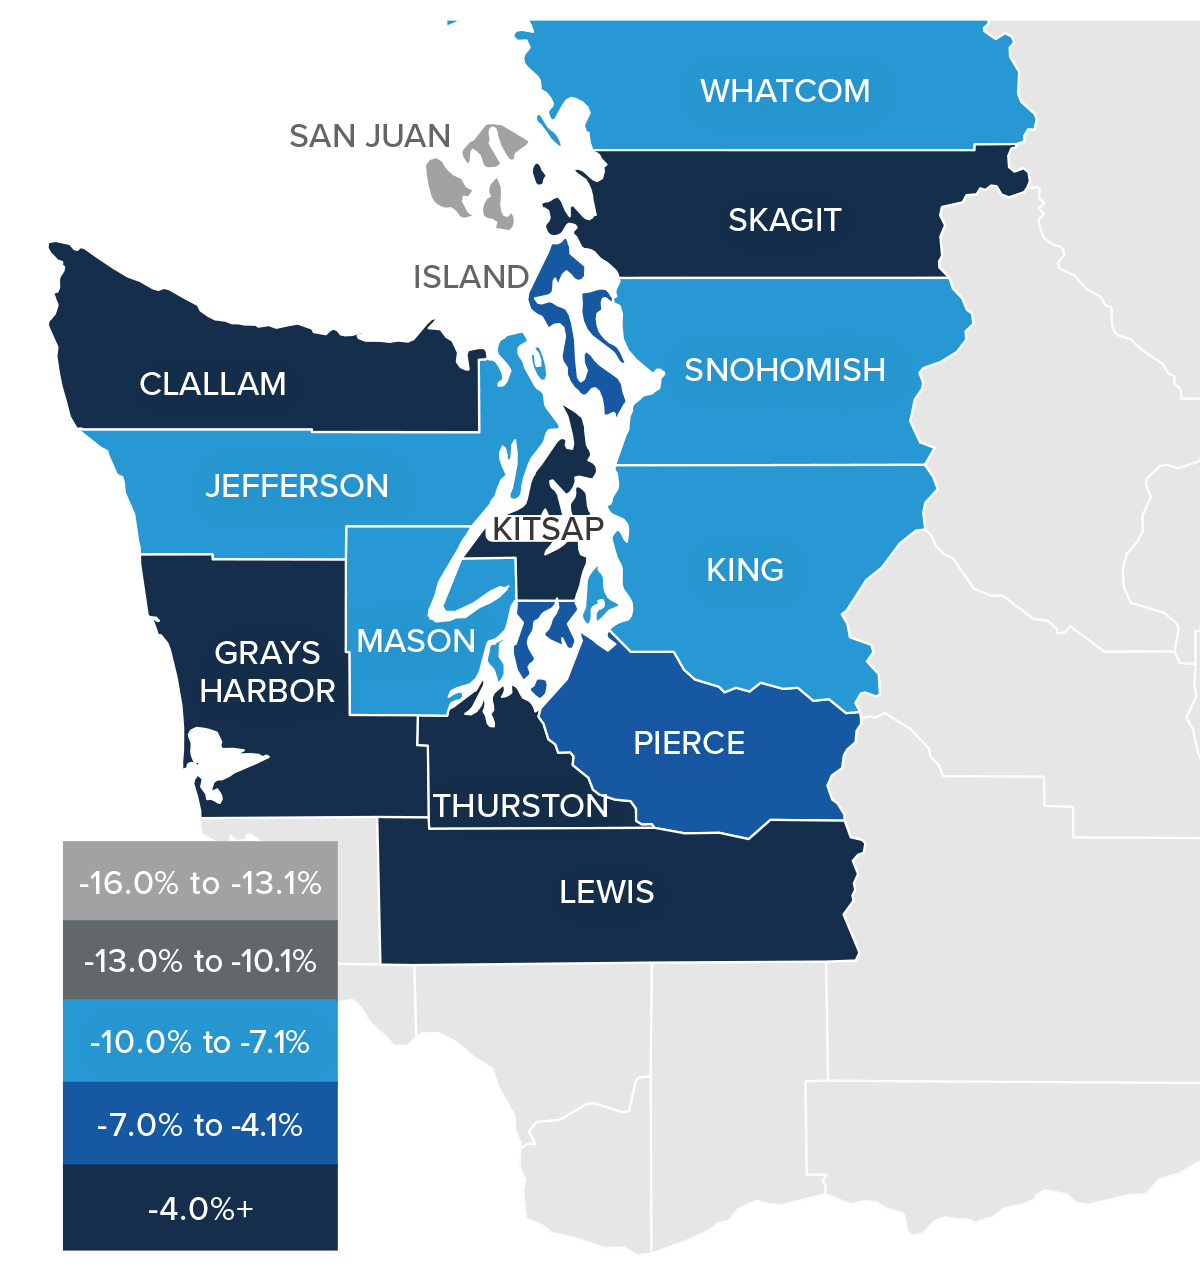 A map showing the real estate home prices percentage changes for various counties in Western Washington. Different colors correspond to different tiers of percentage change. San Juan County has a percentage change in the -16% to -13.1% range, Whatcom, Snohomish, King, Mason, and Jefferson are in the -10% to -7.1% change range, Pierce is in the -7% to -4.1% change range, and Lewis, Skagit, Clallam, Grays Harbor, Kitsap, and Thurston are in the -4%+ change range.